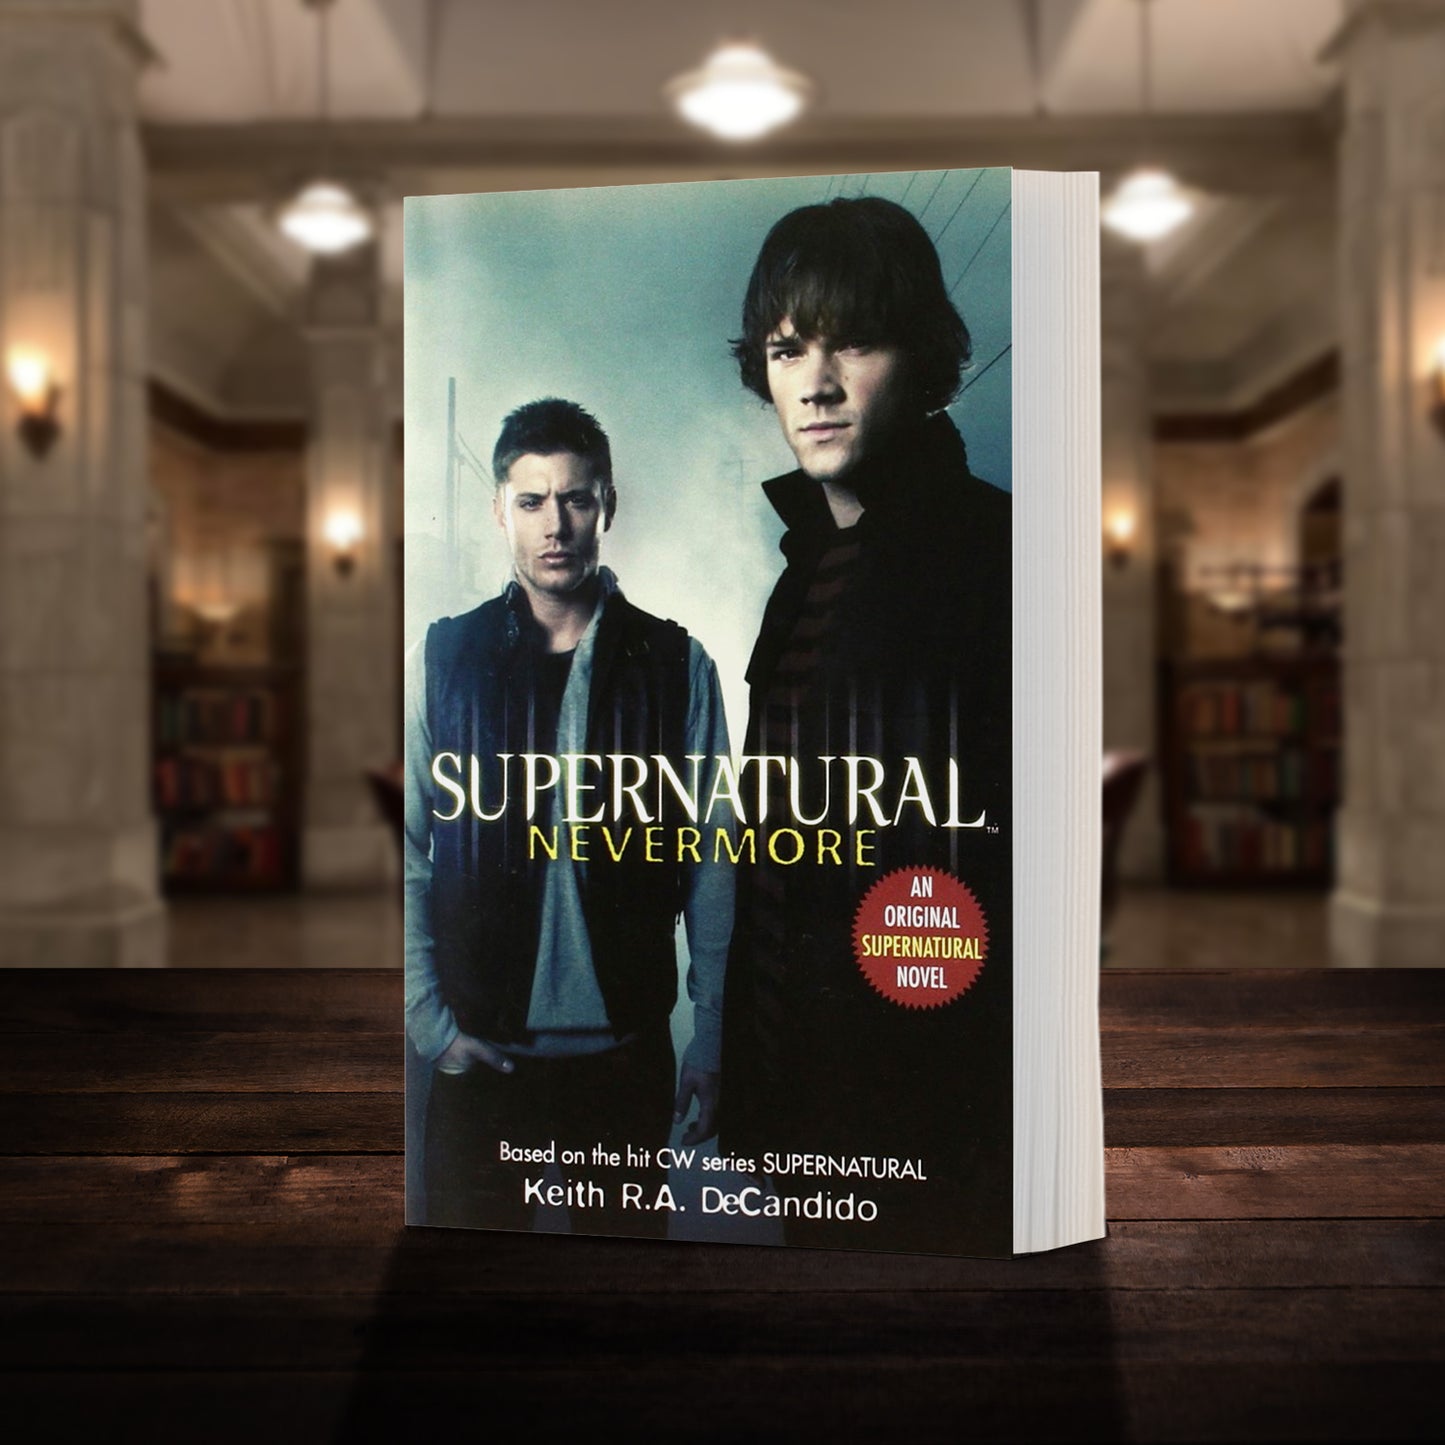 A copy of the book "Supernatural: Nevermore" as pictured in the "bunker" from Supernatural. The cover shows early-season Sam and Dean Winchester and reads "Supernatural Nevermore - Based on the hit CW series SUPERNATURAL by Keith R.A. DeCandido"